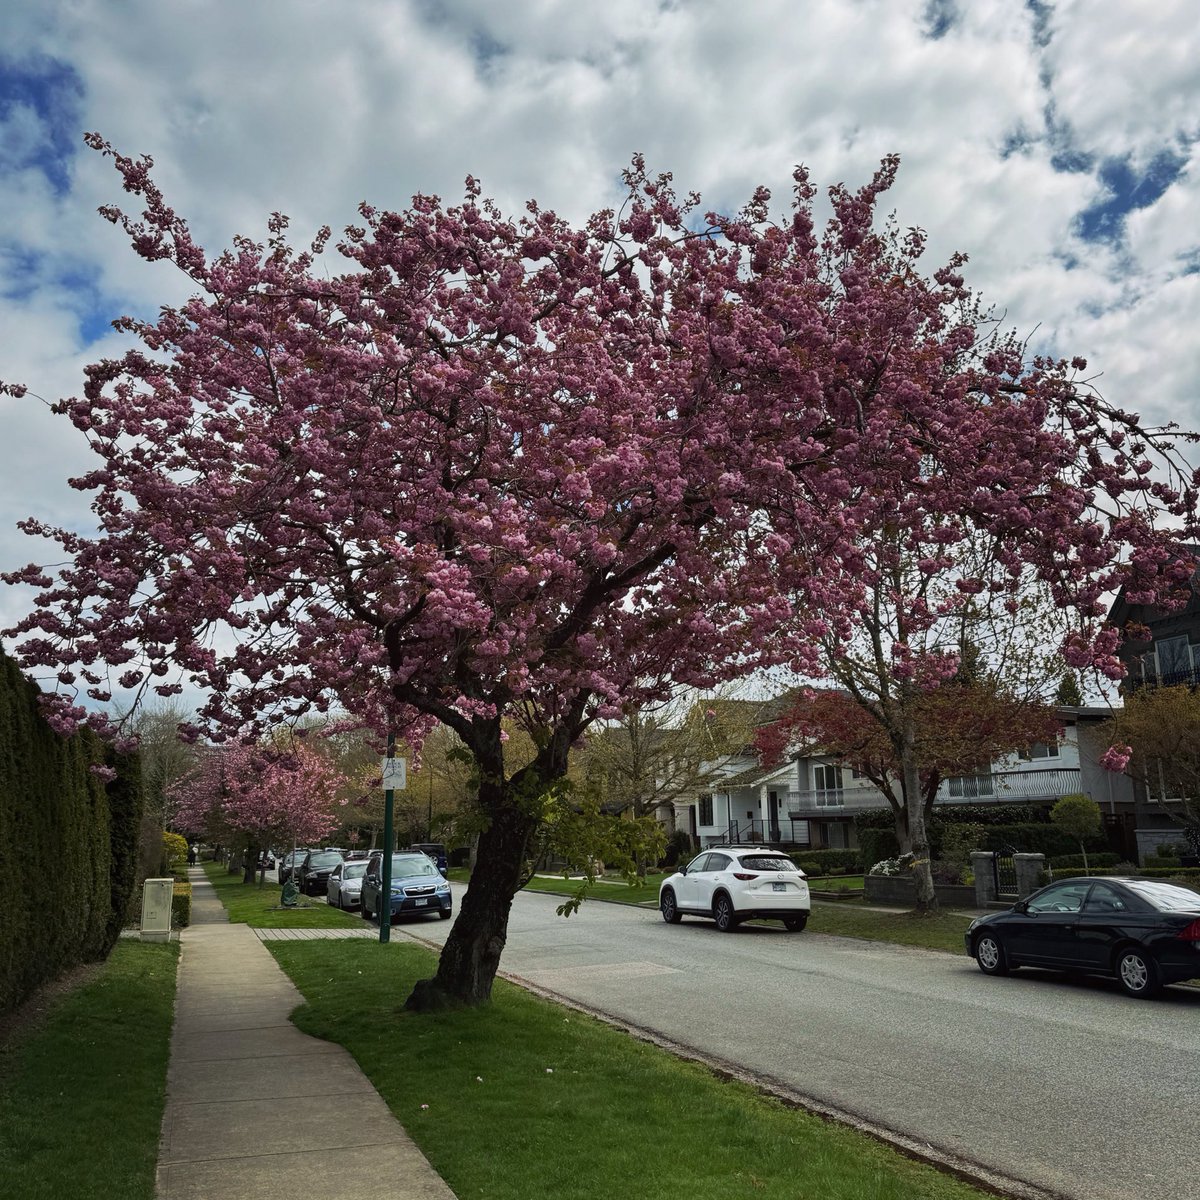 Blossoming Vancouver. 

#trees #nature #blossom #spring #vancouver #britishcolumbia